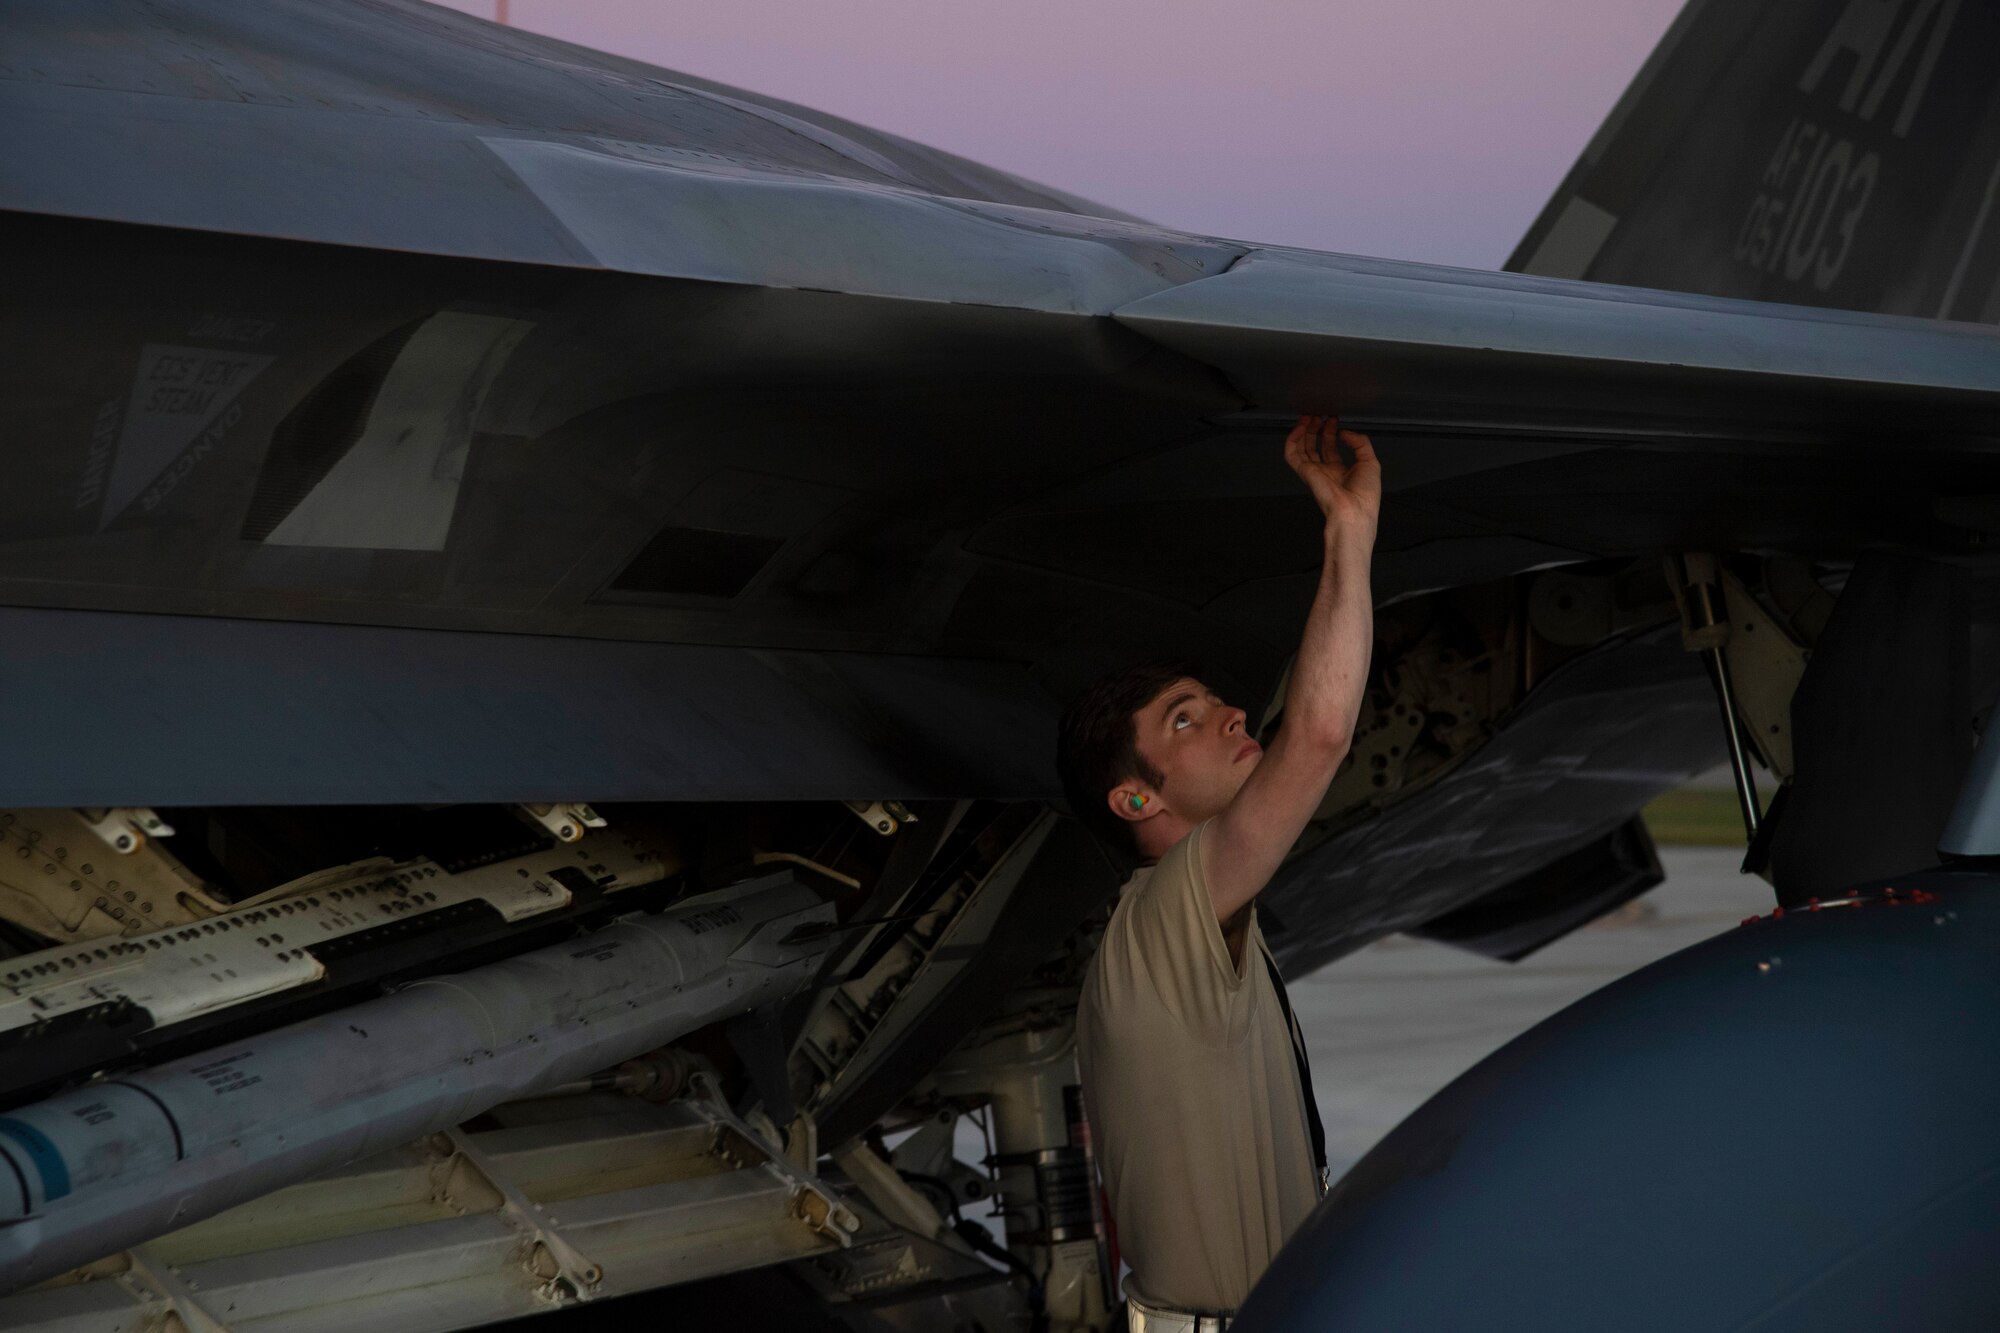 An Airman assigned to Joint Base Elmendorf-Richardson, Alaska, performs regular maintenance on U.S. Air Force F-22 Raptors after they arrive July 9, to Royal Australian Air Force Base Amberley, Australia, in support of Talisman Sabre 19. Talisman Sabre is a bilateral combined Australian and United States training activity designed to improve interoperability increase combat readiness. (U.S. Air Force photo by Senior Airman Elora J. Martinez)